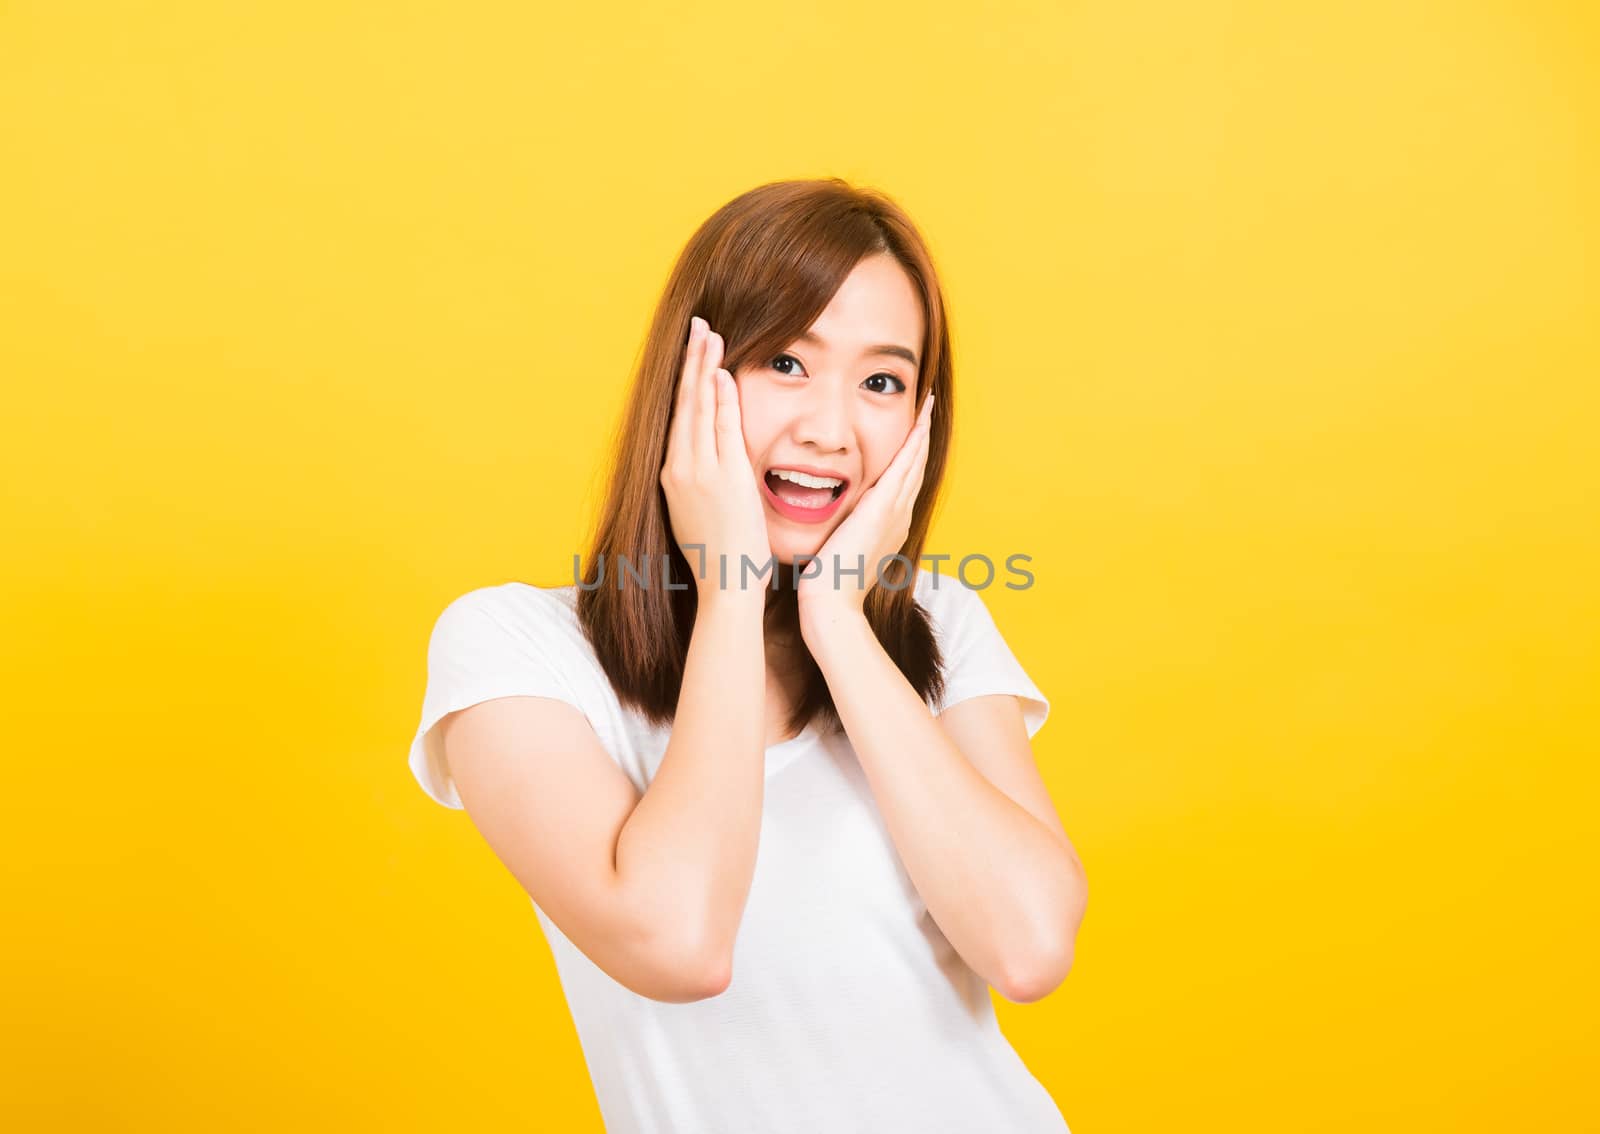 woman teen stand surprised excited celebrating open mouth gestur by Sorapop